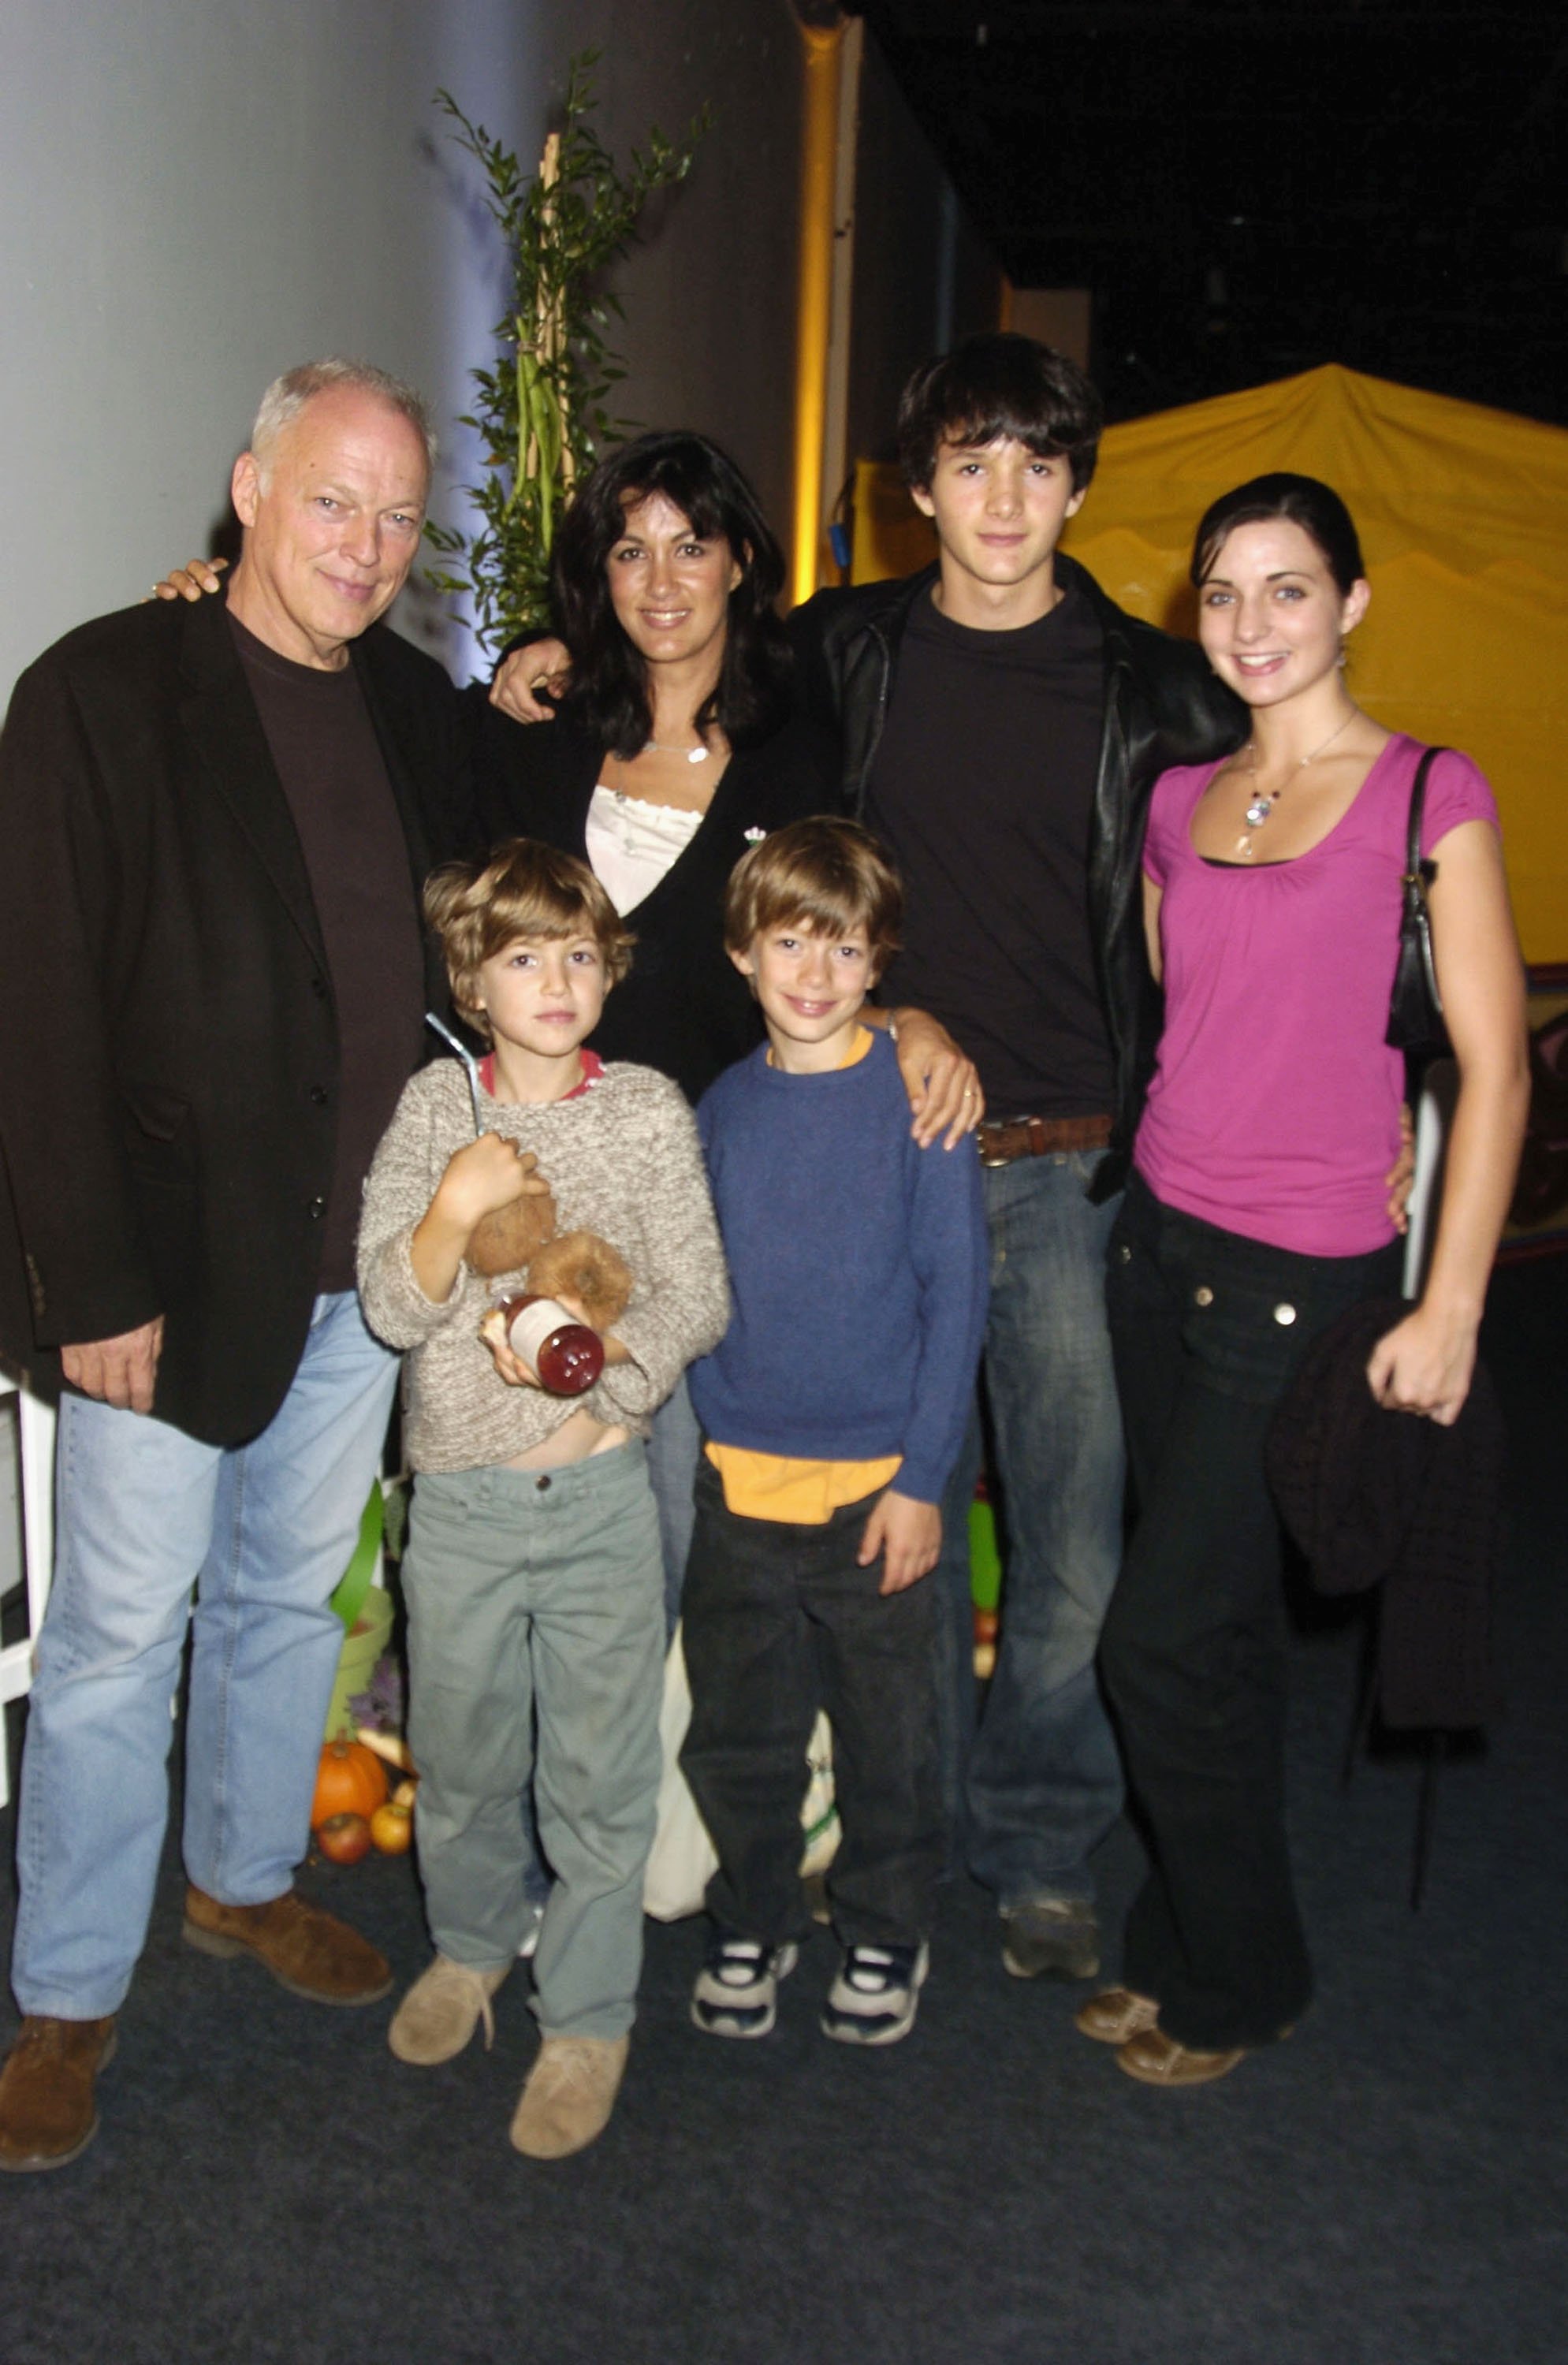 David Gilmour, Polly Samson, and their children at the after the UK premiere of animated film "Wallace & Gromit: The Curse Of The Were-Rabbit," at The Space, in London, England, on October 2, 2005. | Source: Getty Images